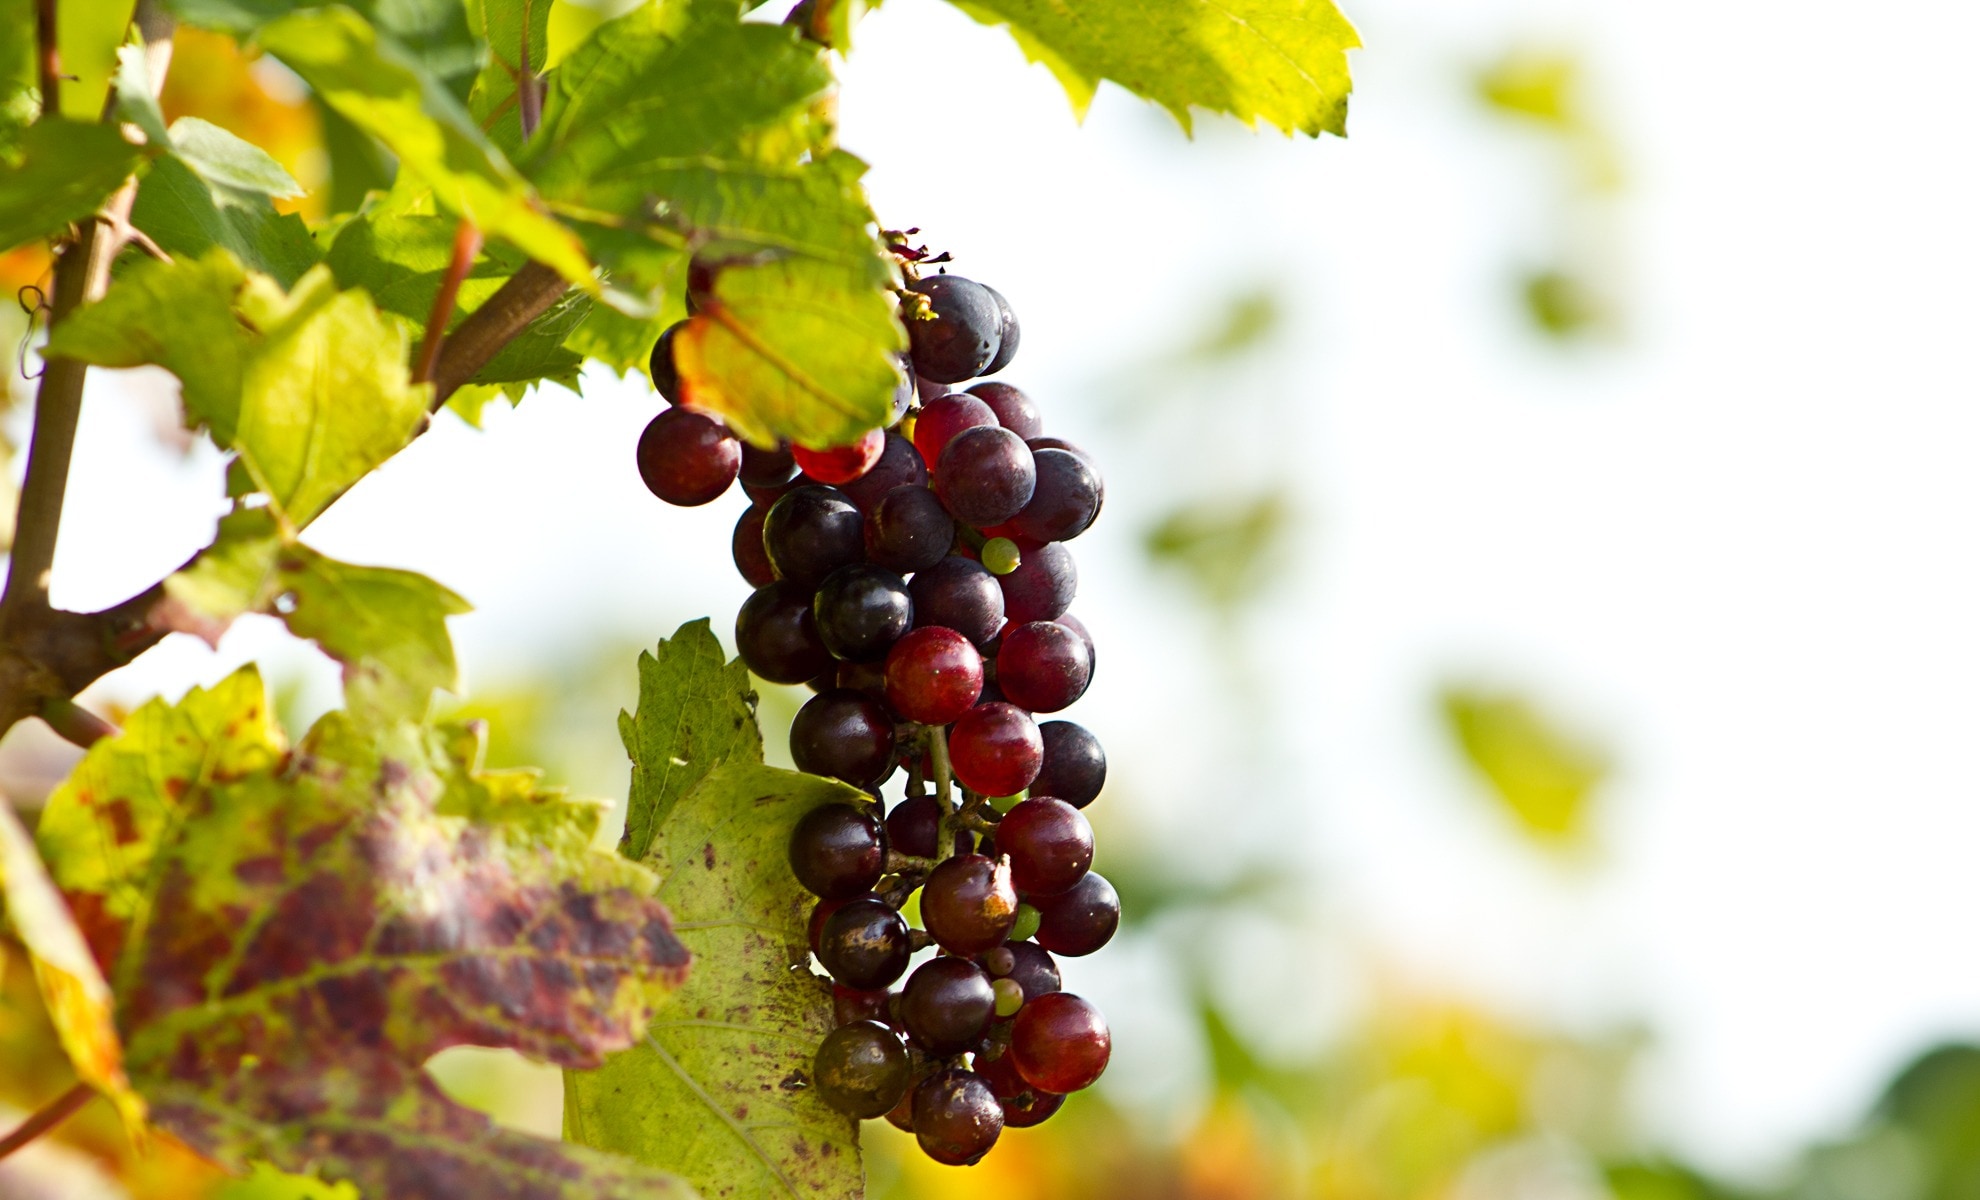 maroon and red grapes